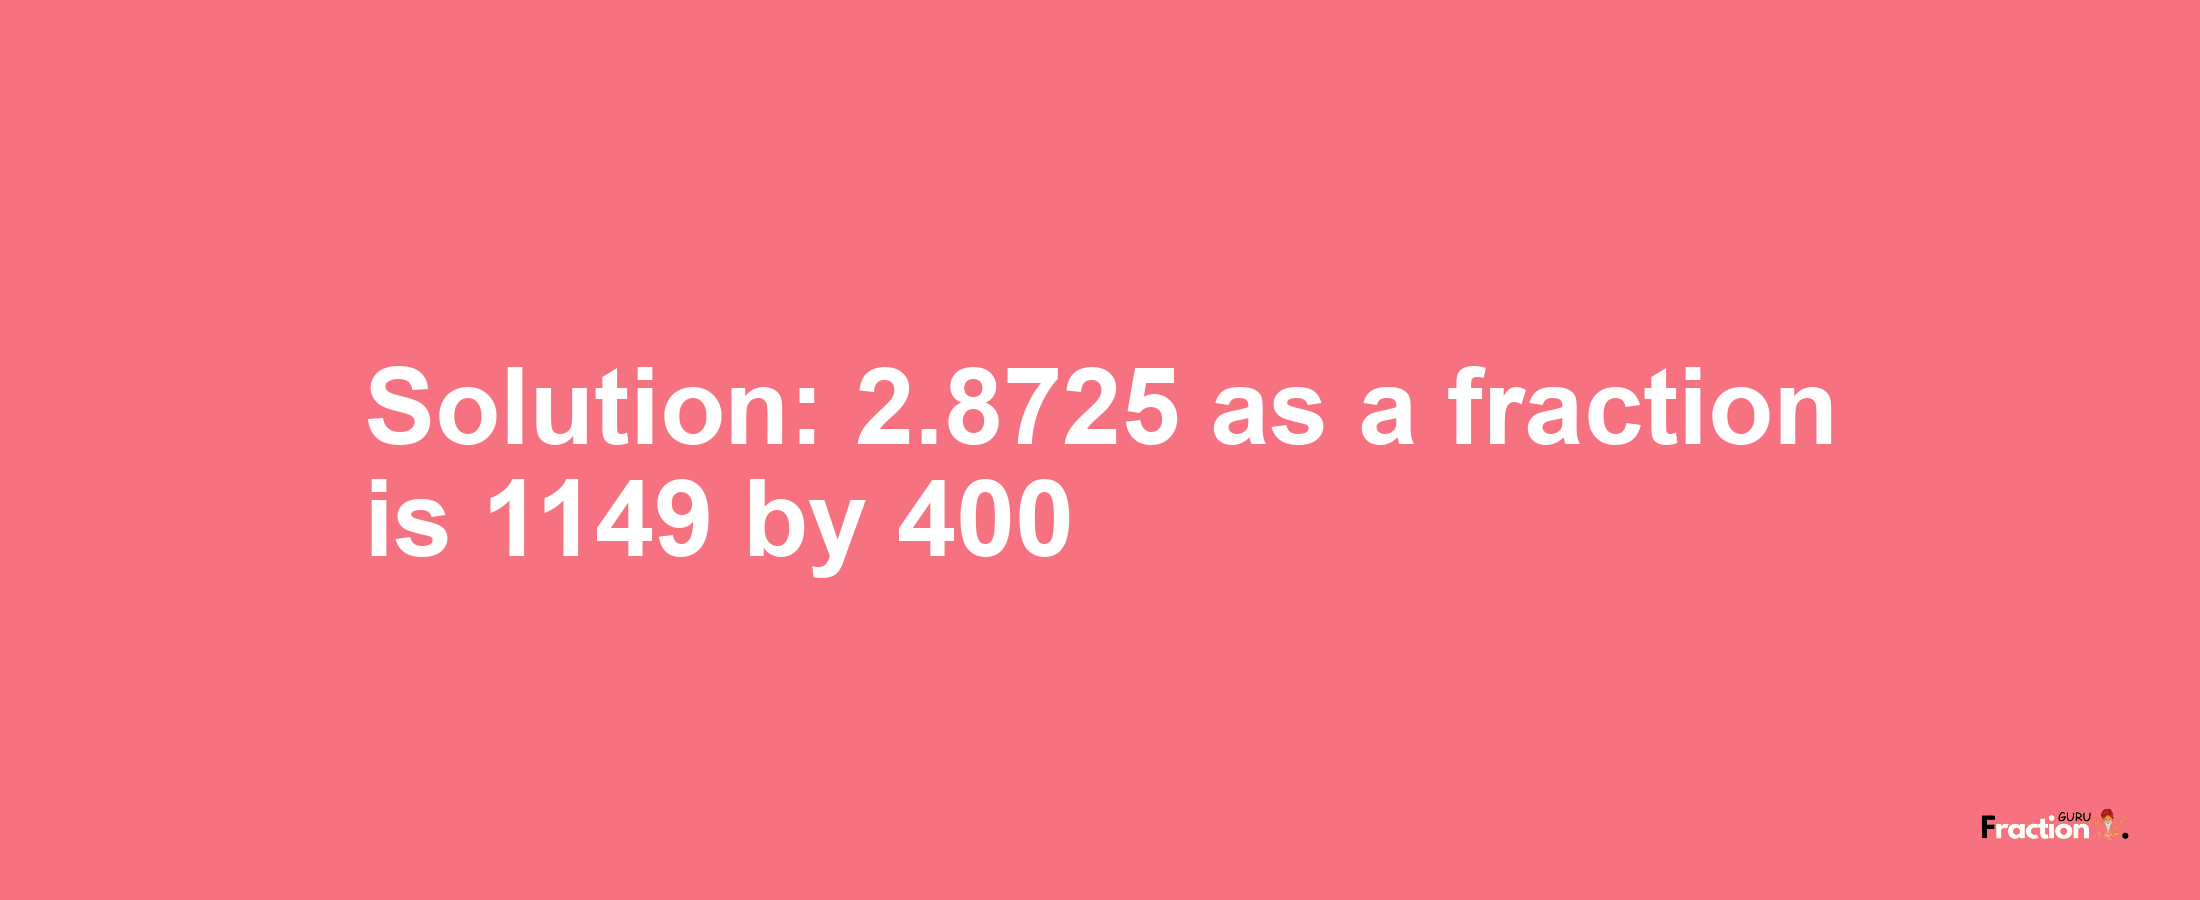 Solution:2.8725 as a fraction is 1149/400